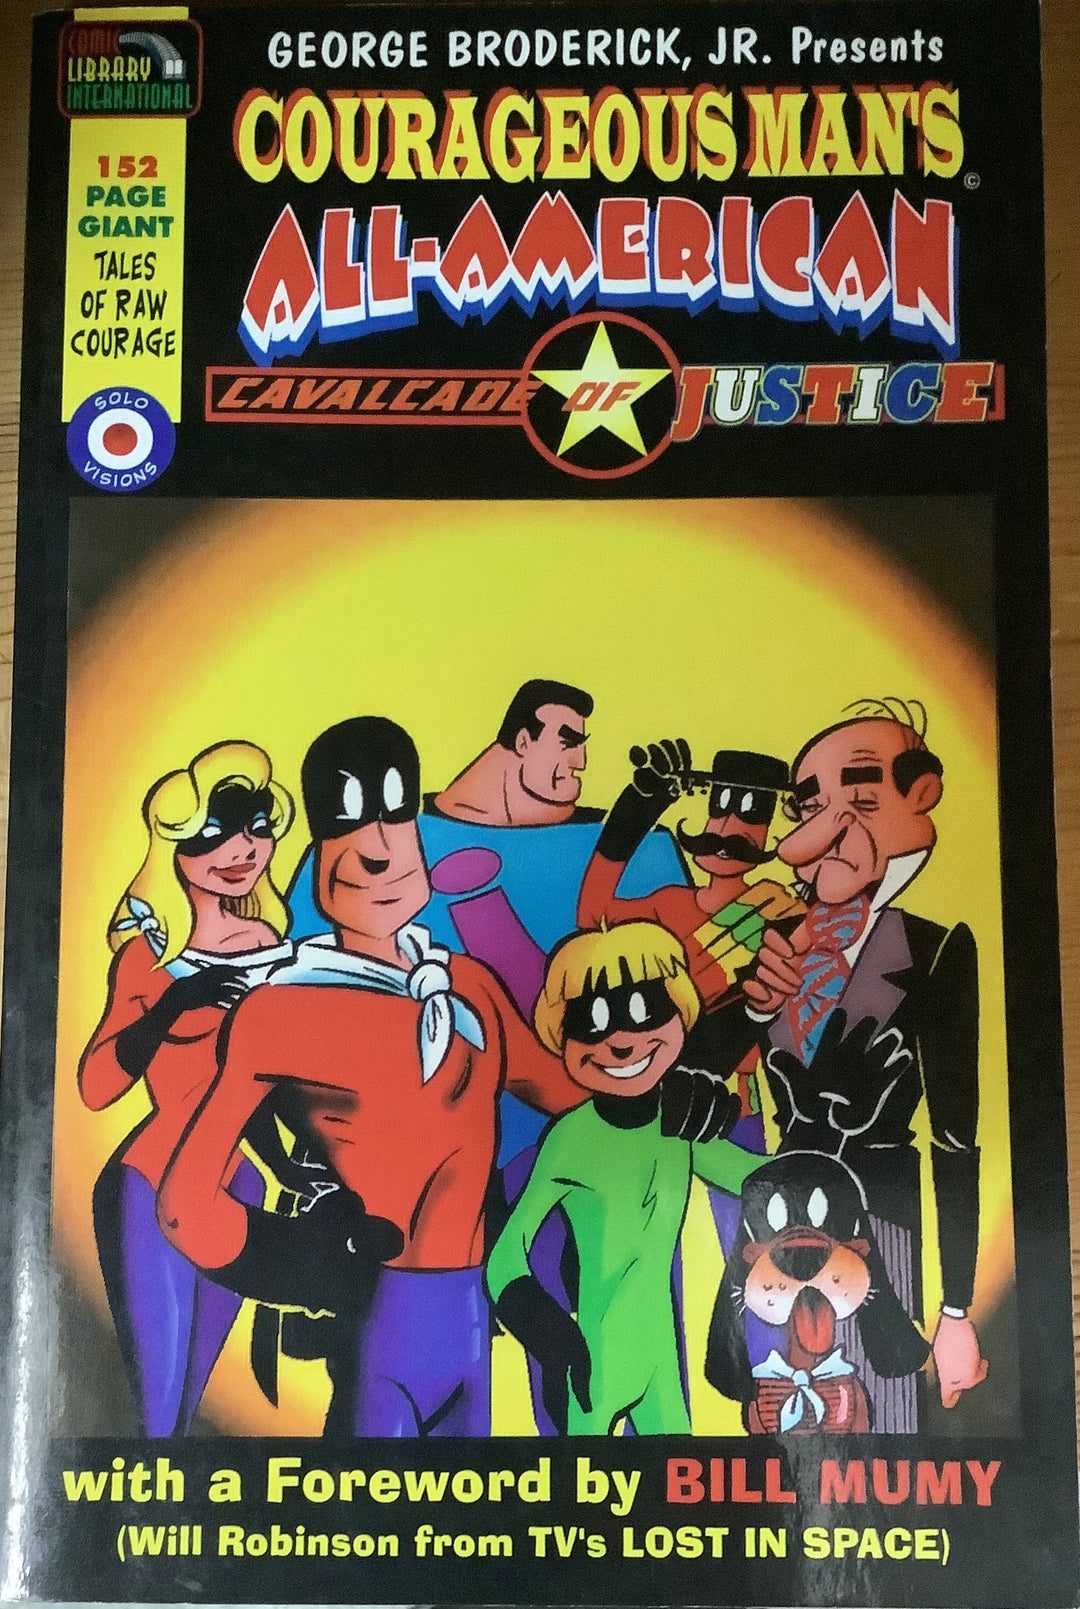 Courageous Man's All-American Cavalcade of Justice Graphic Novel OXS-02